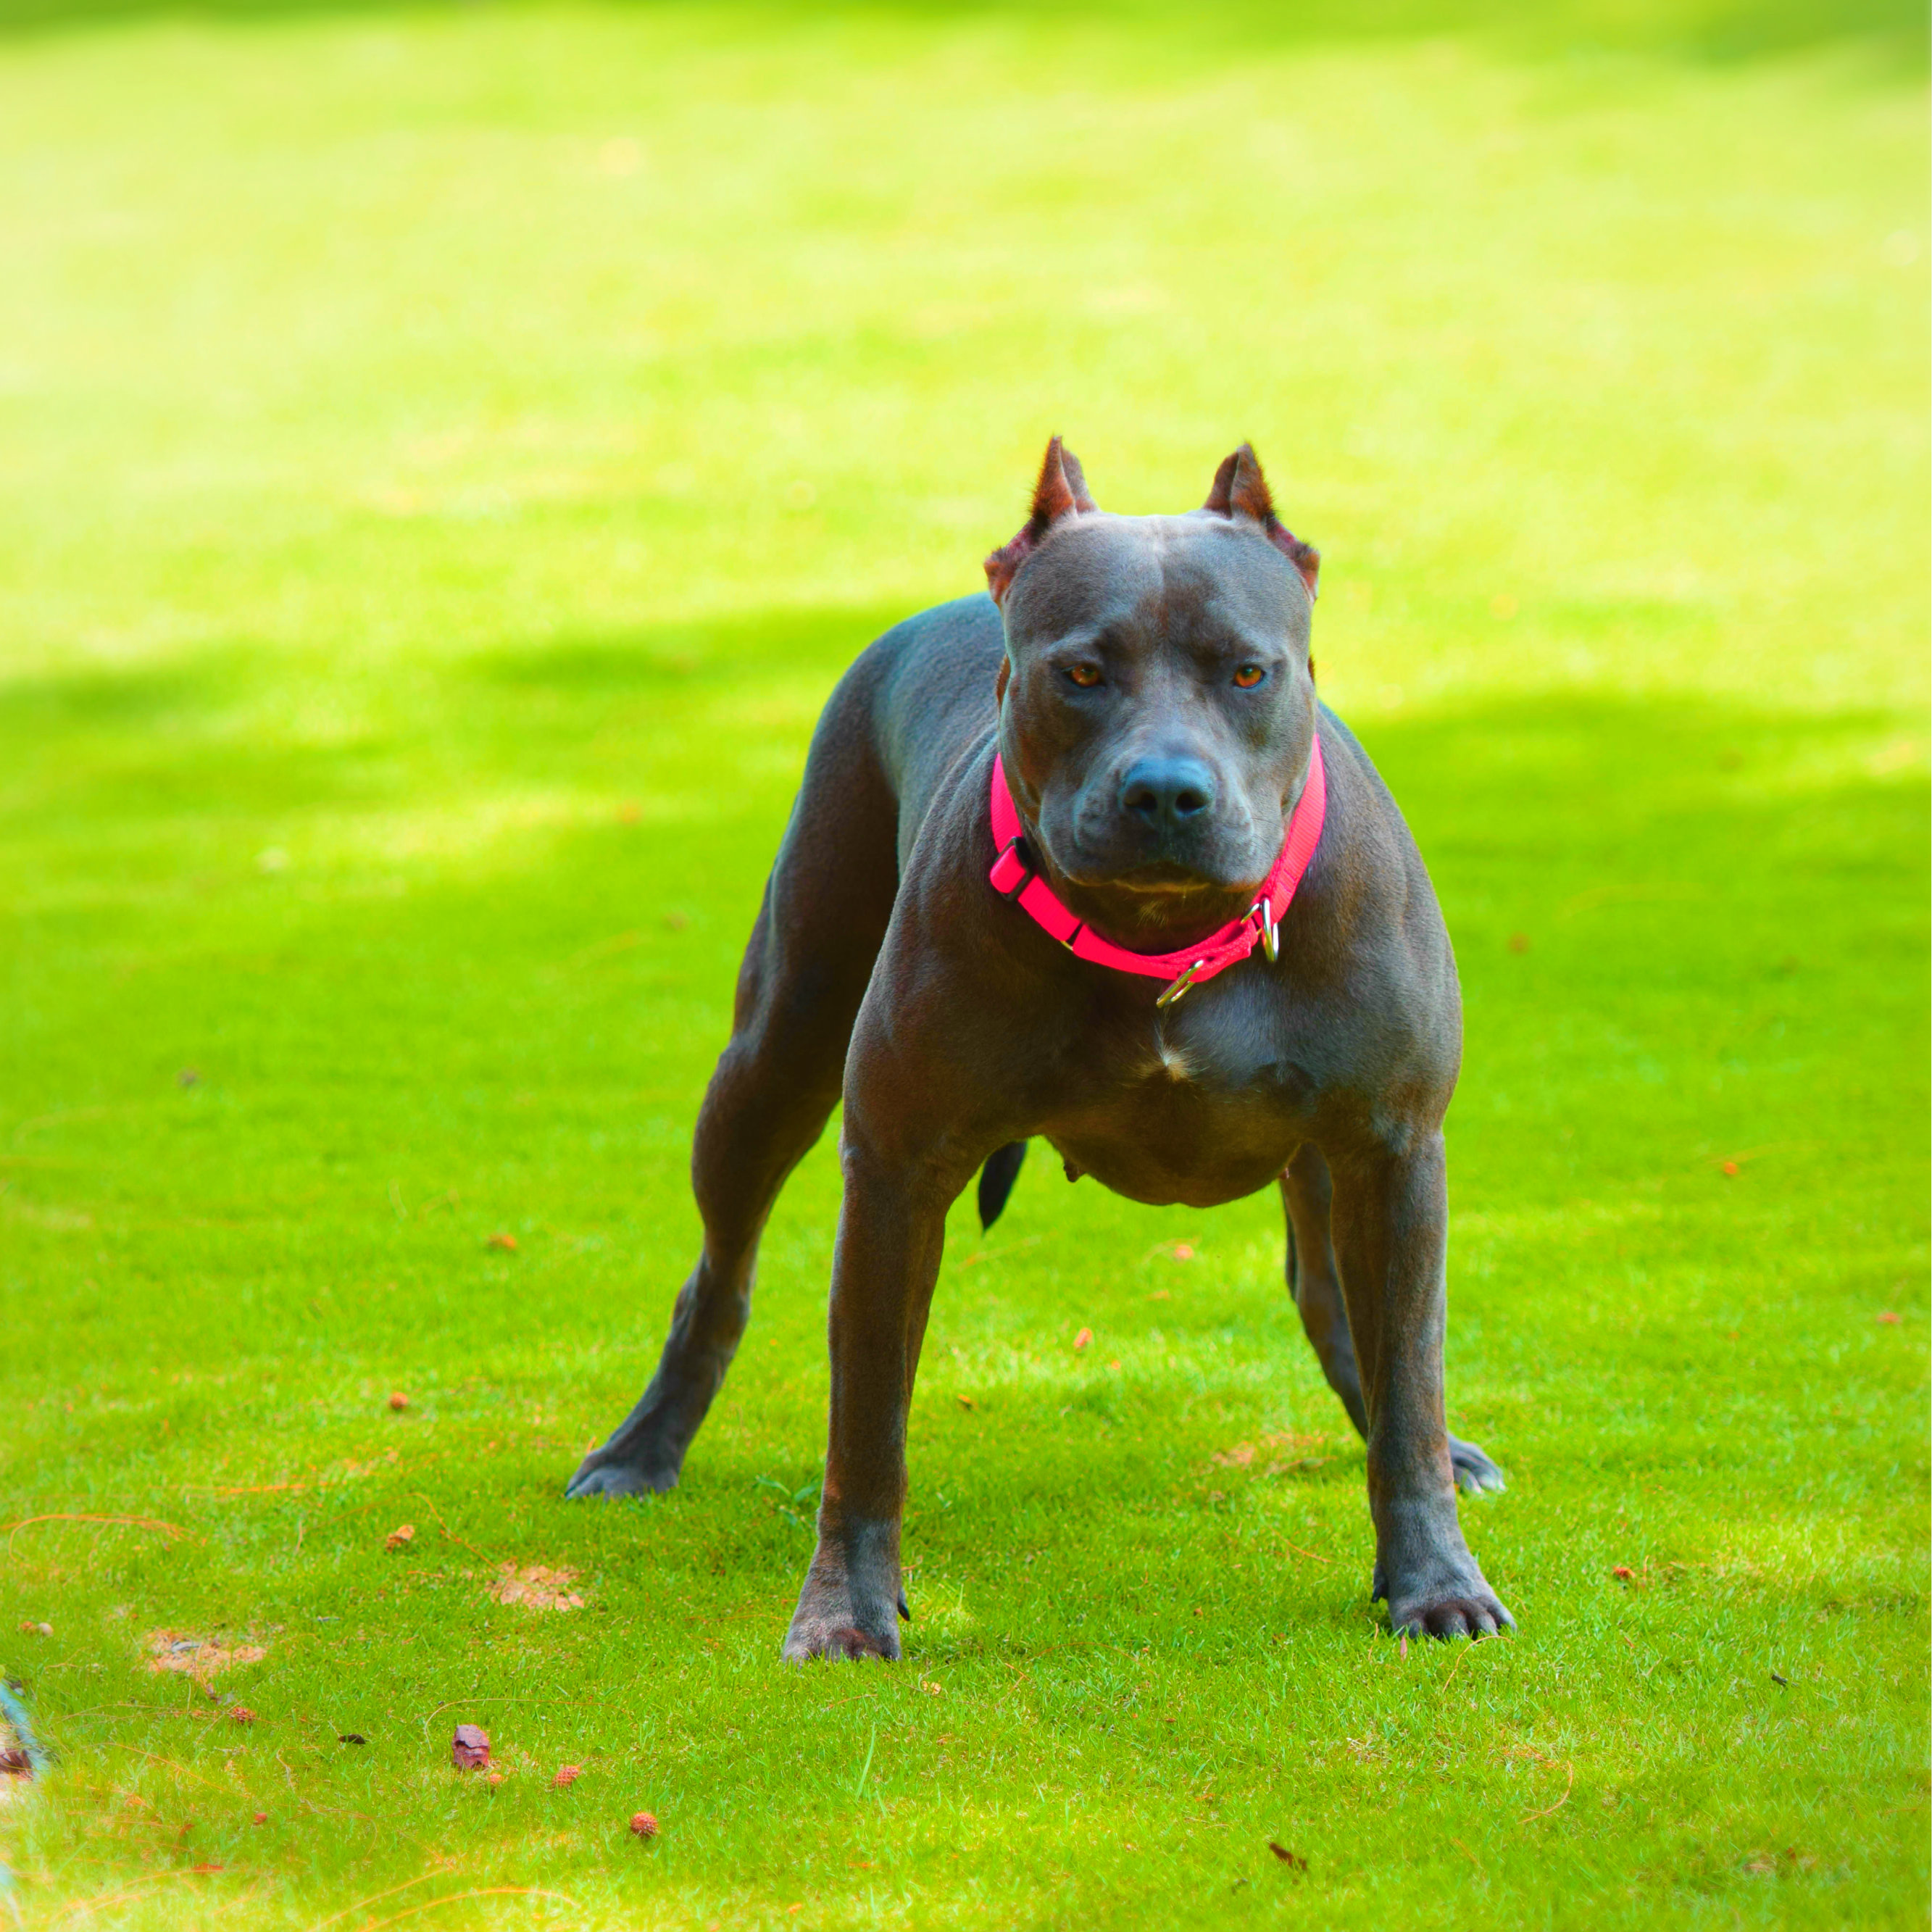 Things You Should “Nose” about the Blue Nose Pitbull